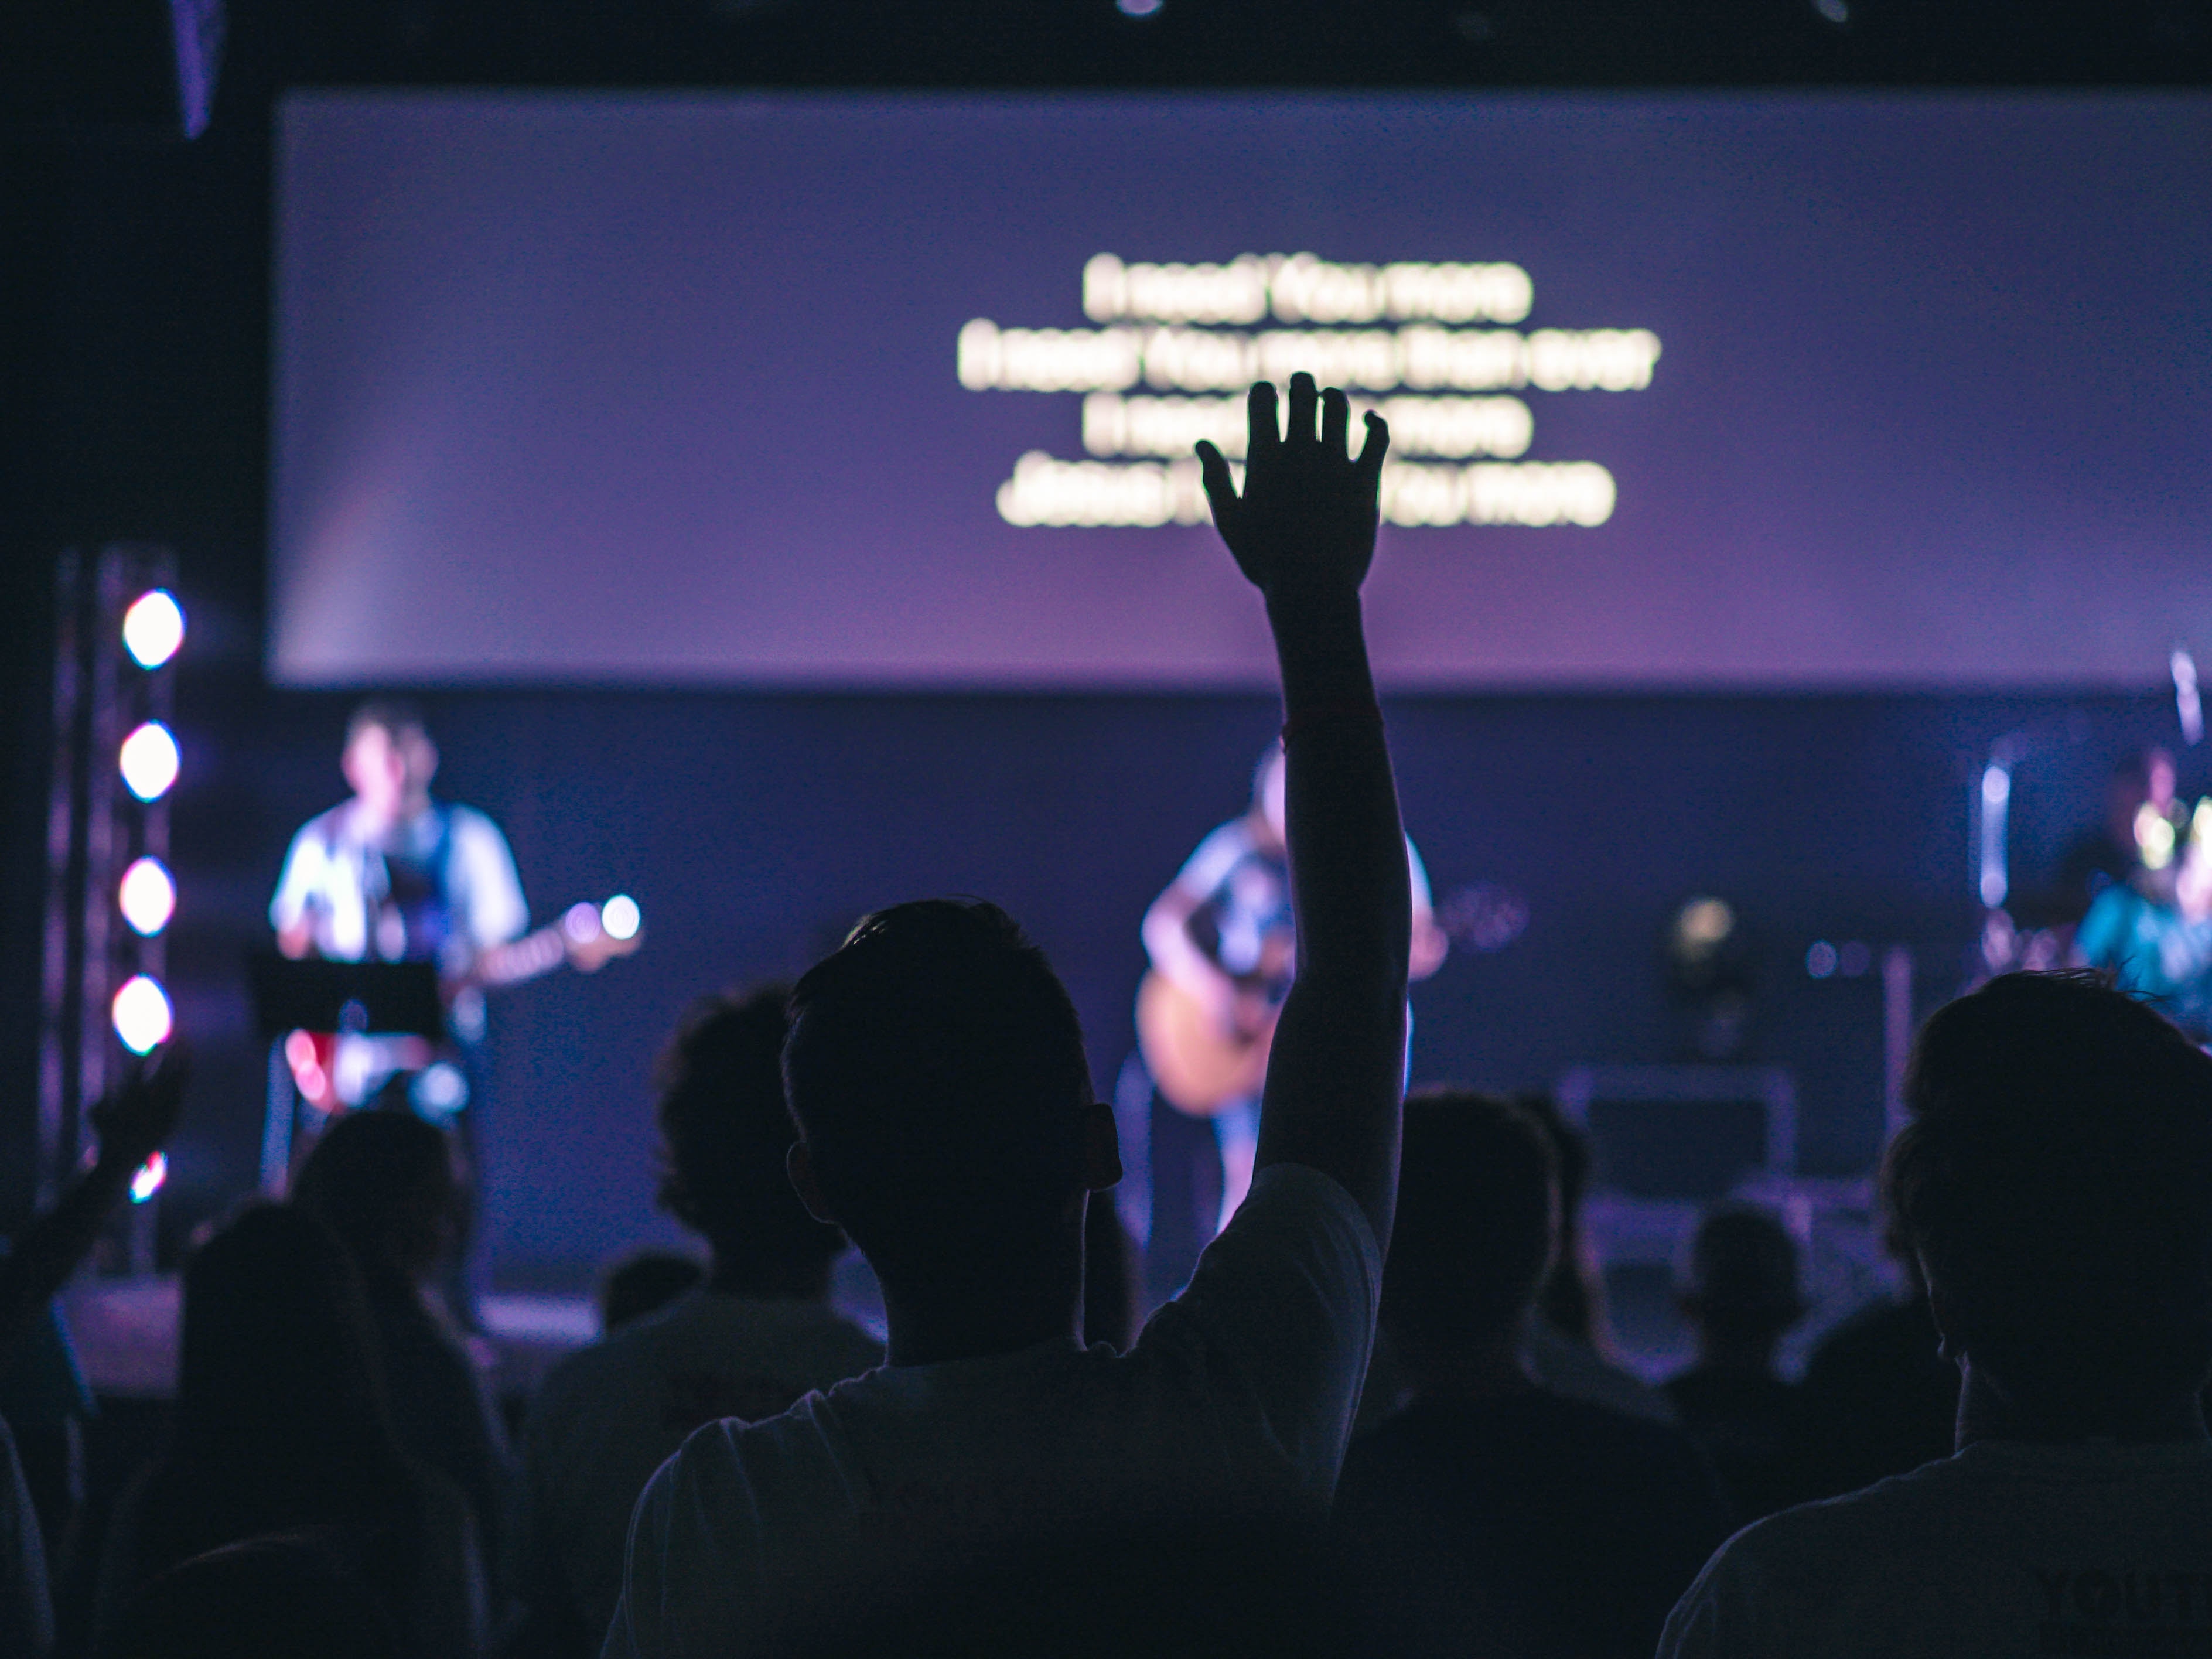 I was the worship pastor at my church and I was miserable